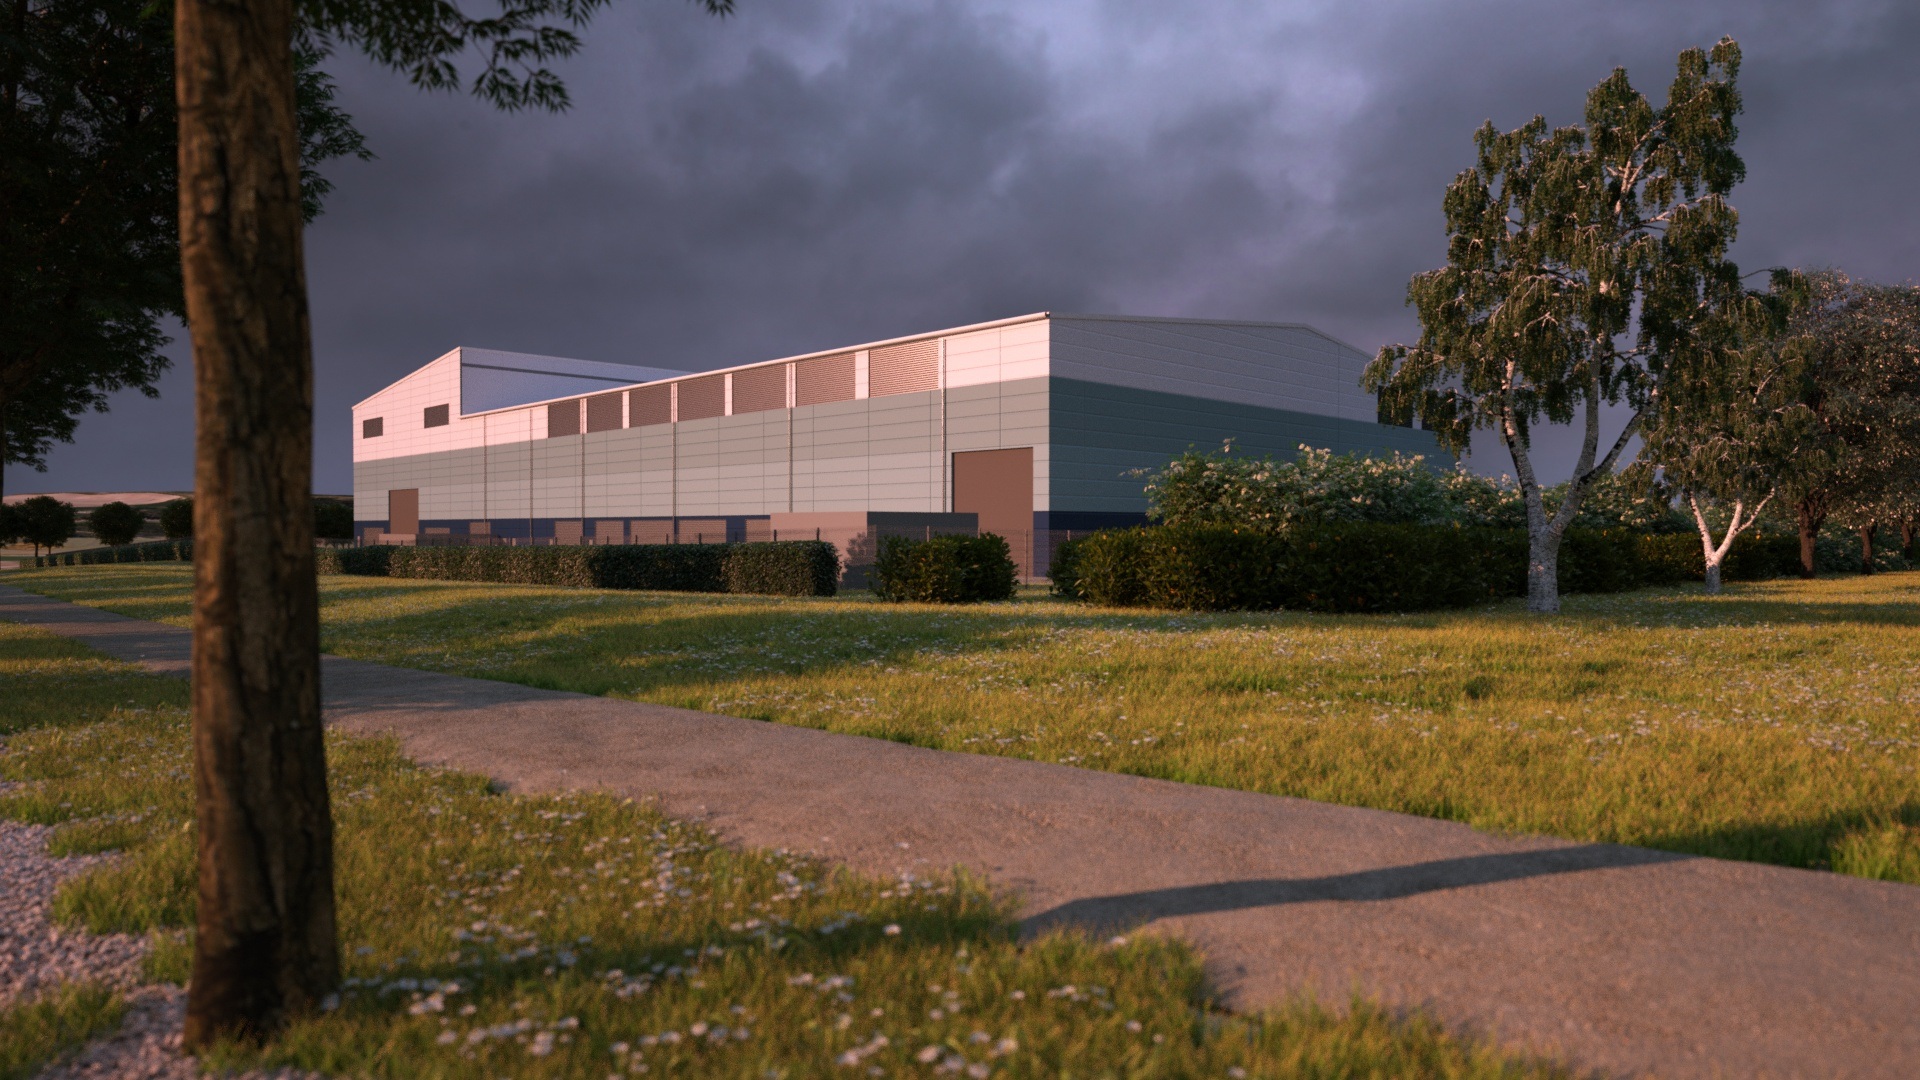 Global Infrastructure lands multi-million pound SSEN Transmission contract for design & construction of storage warehouses in Inverness and Dundee